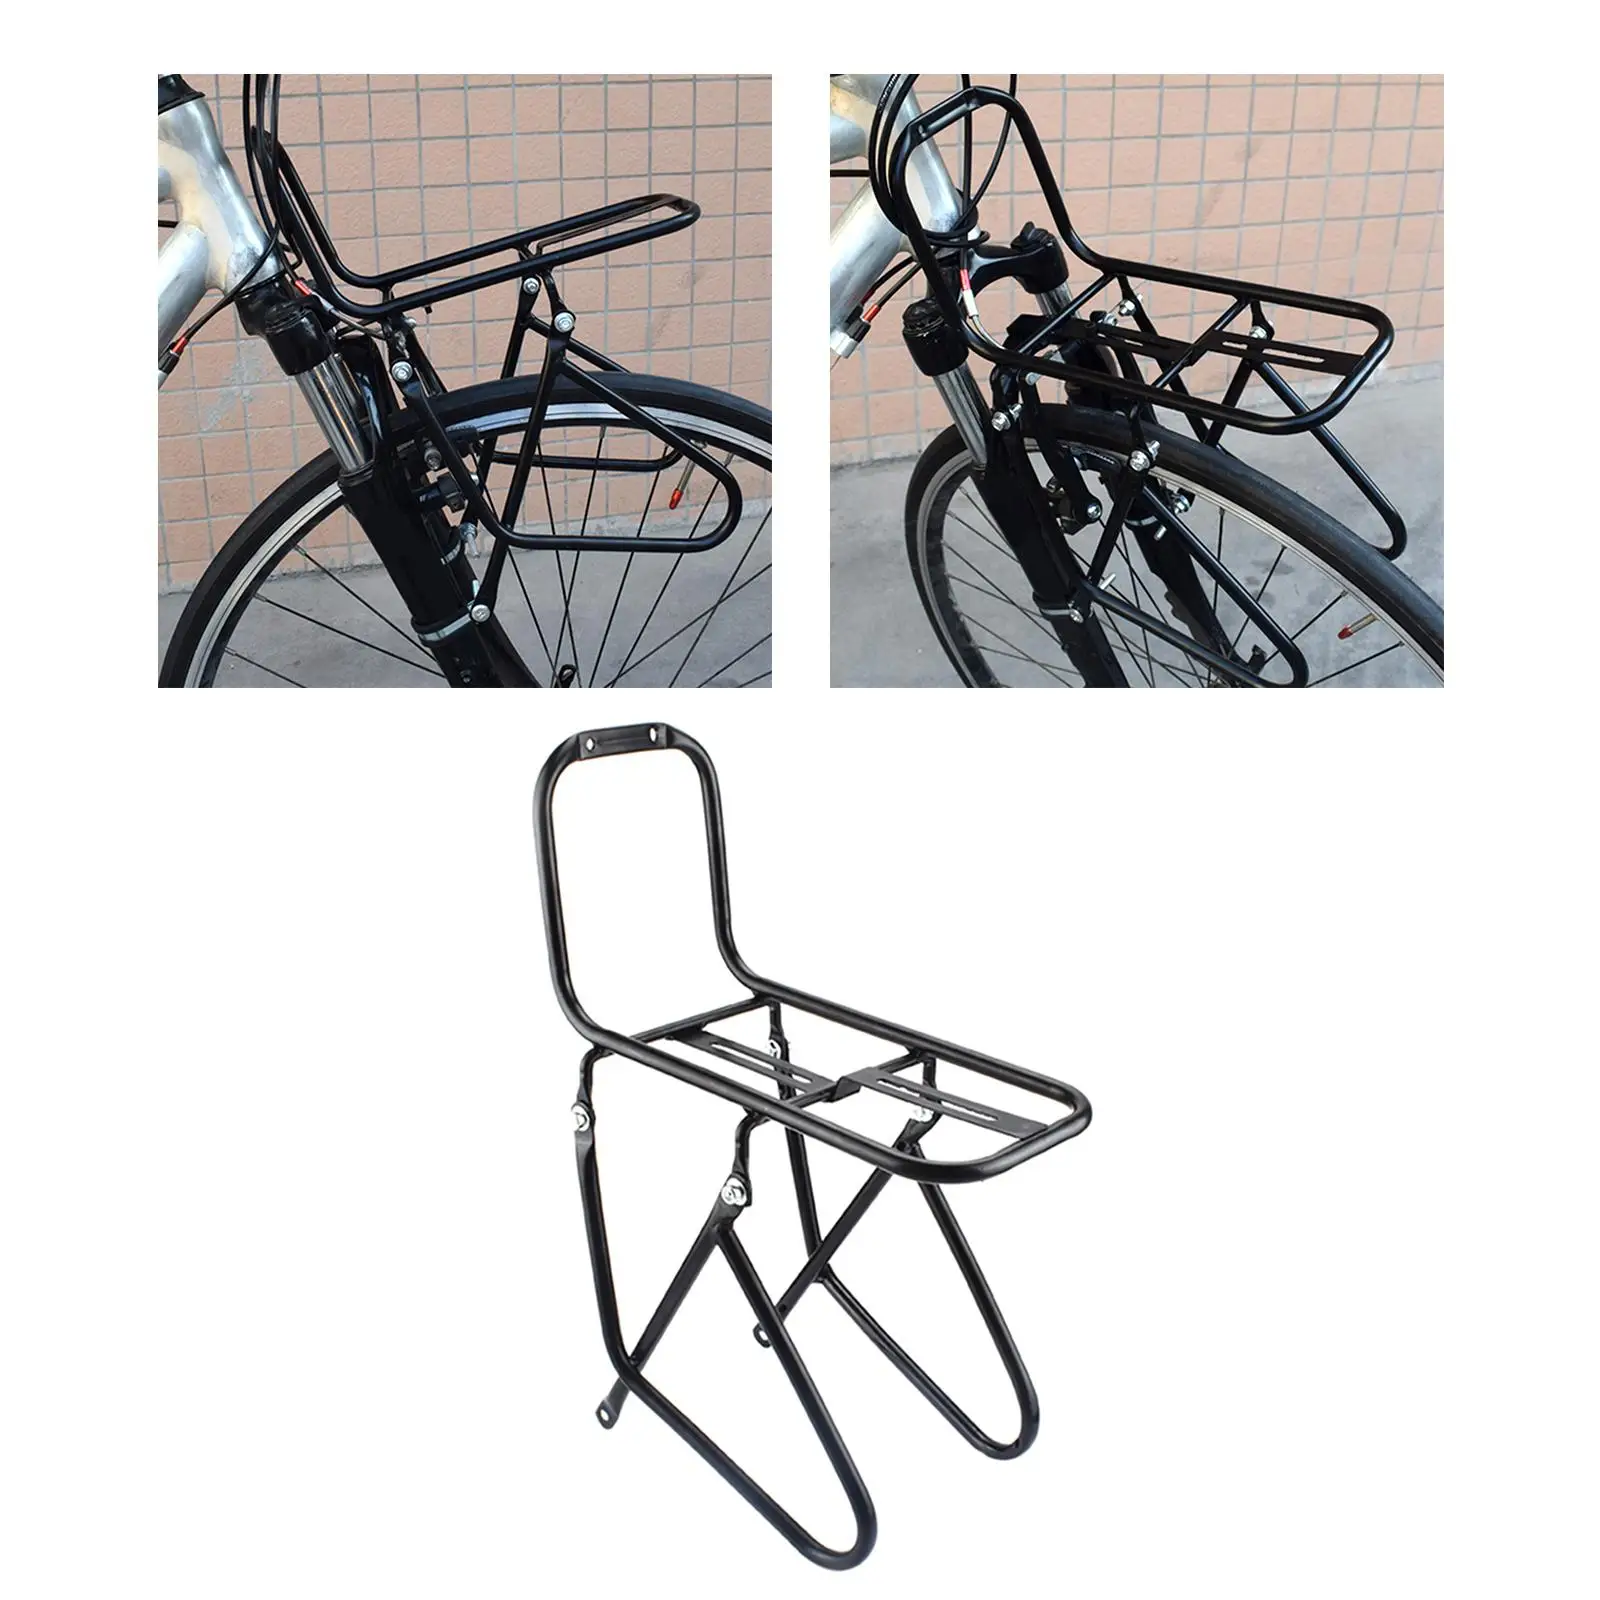 Bike Front Rack Bicycle Carrier Panniers Bag Basket Luggage Shelf Cargo Rack Durable Practical Sturdy Carrier for Mountain Bikes